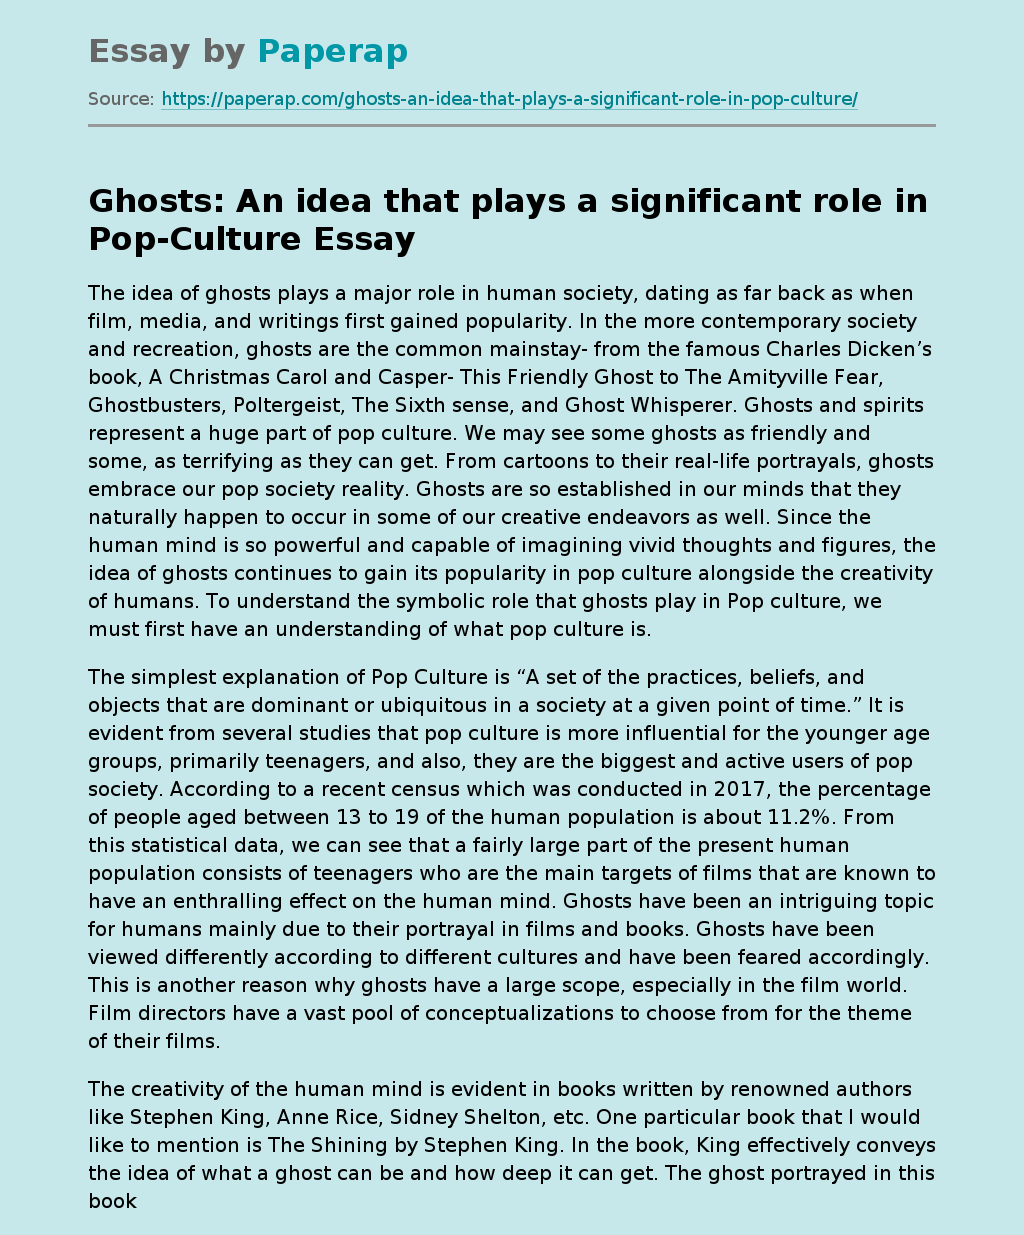 Ghosts: An idea that plays a significant role in Pop-Culture